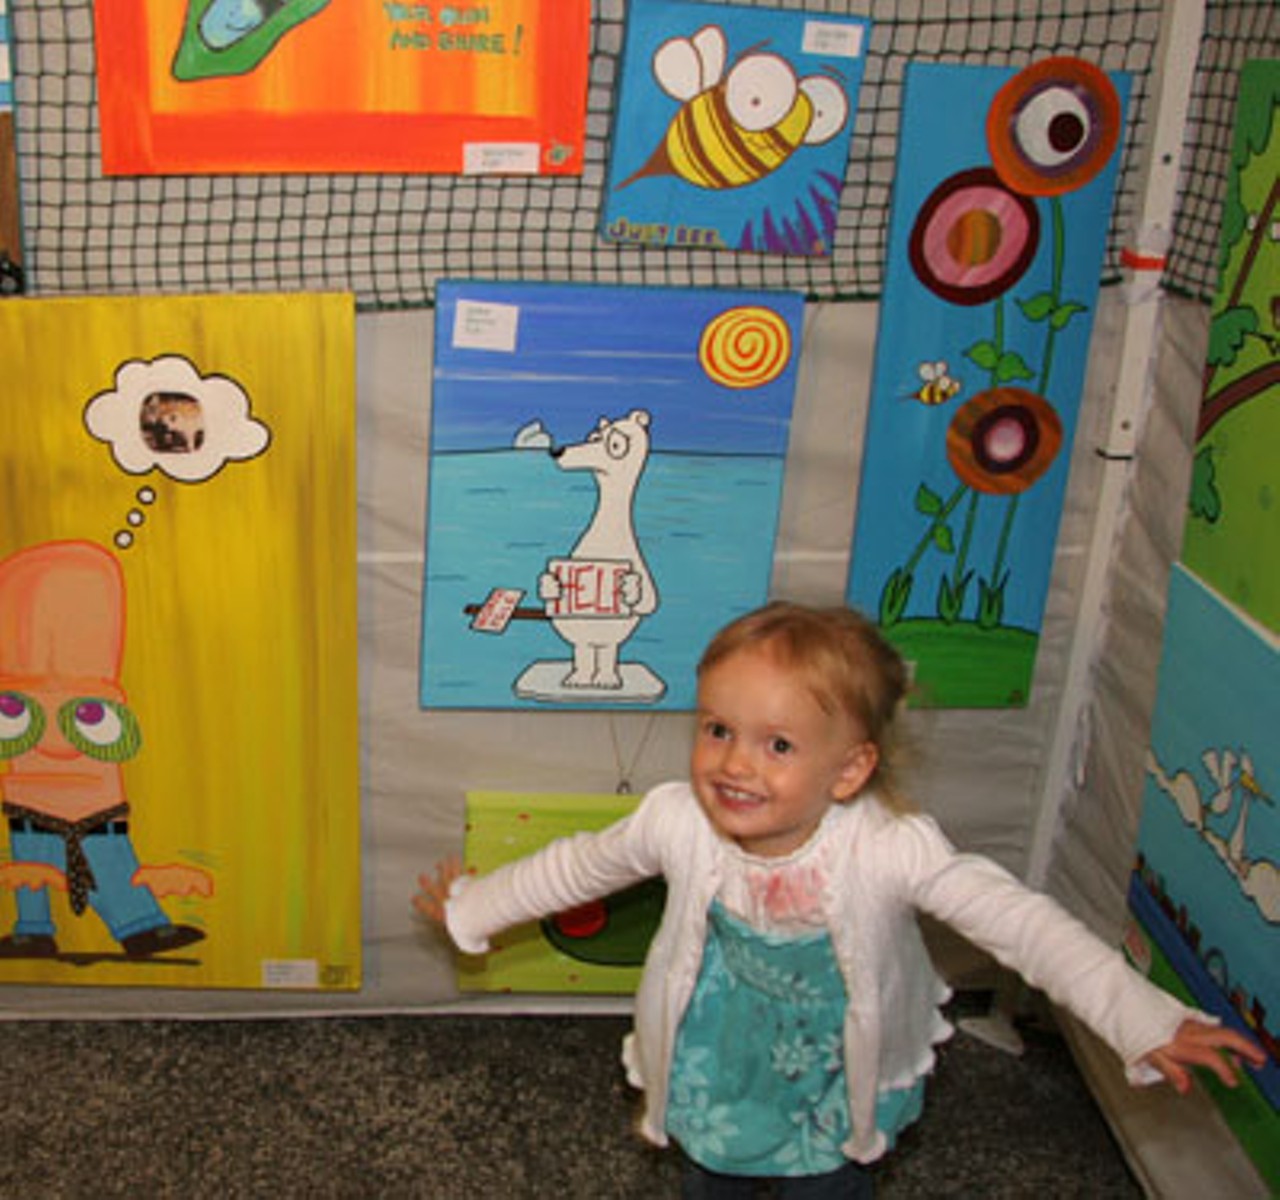 A young fan of Joe Mohr's colorful paintings.